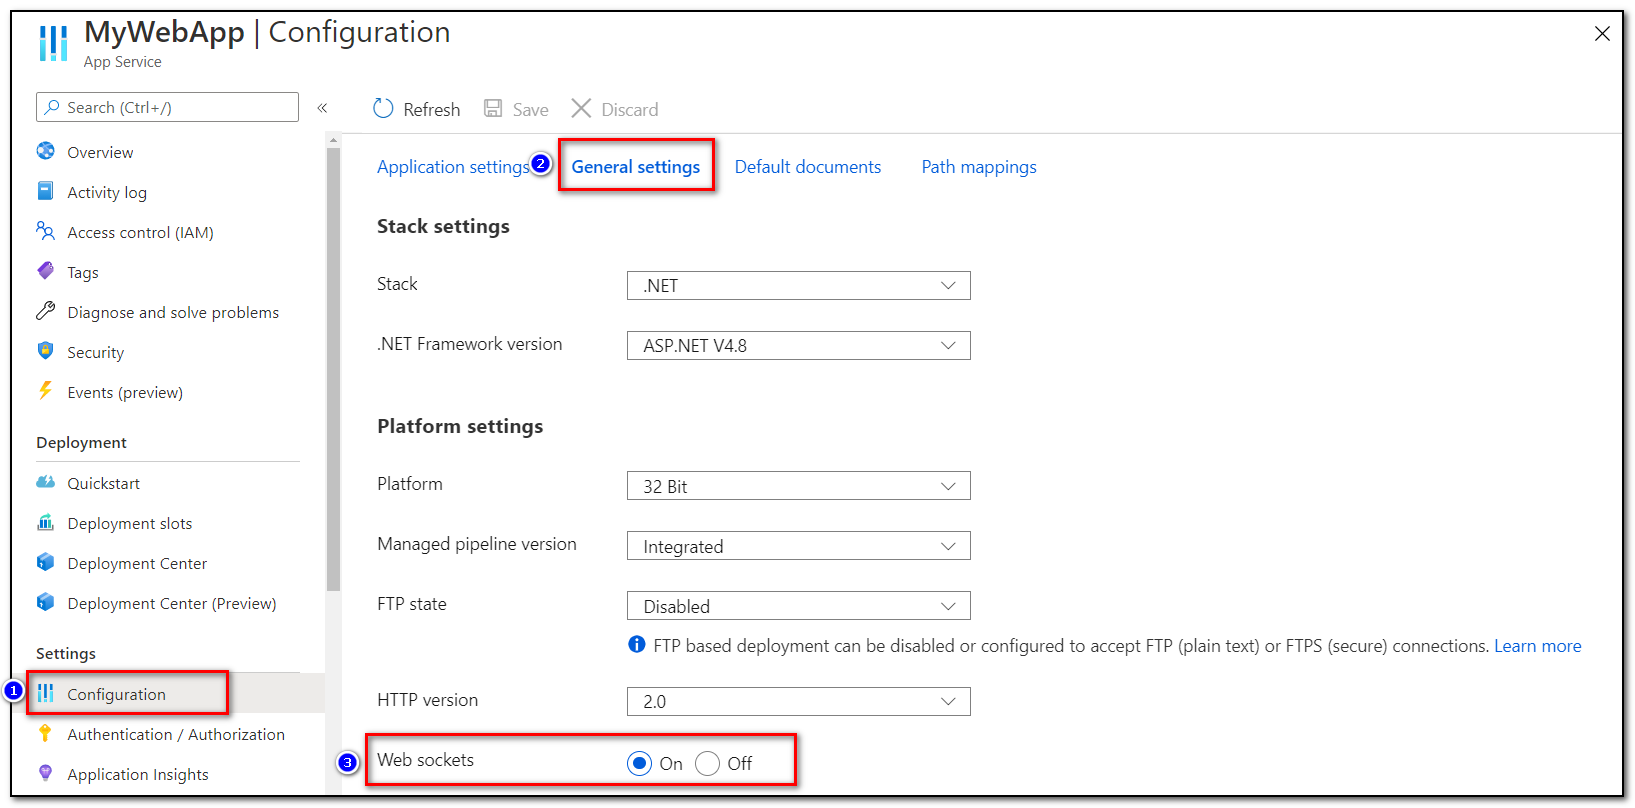 WebApp configuration in the Azure portal, showing how to enable web sockets.